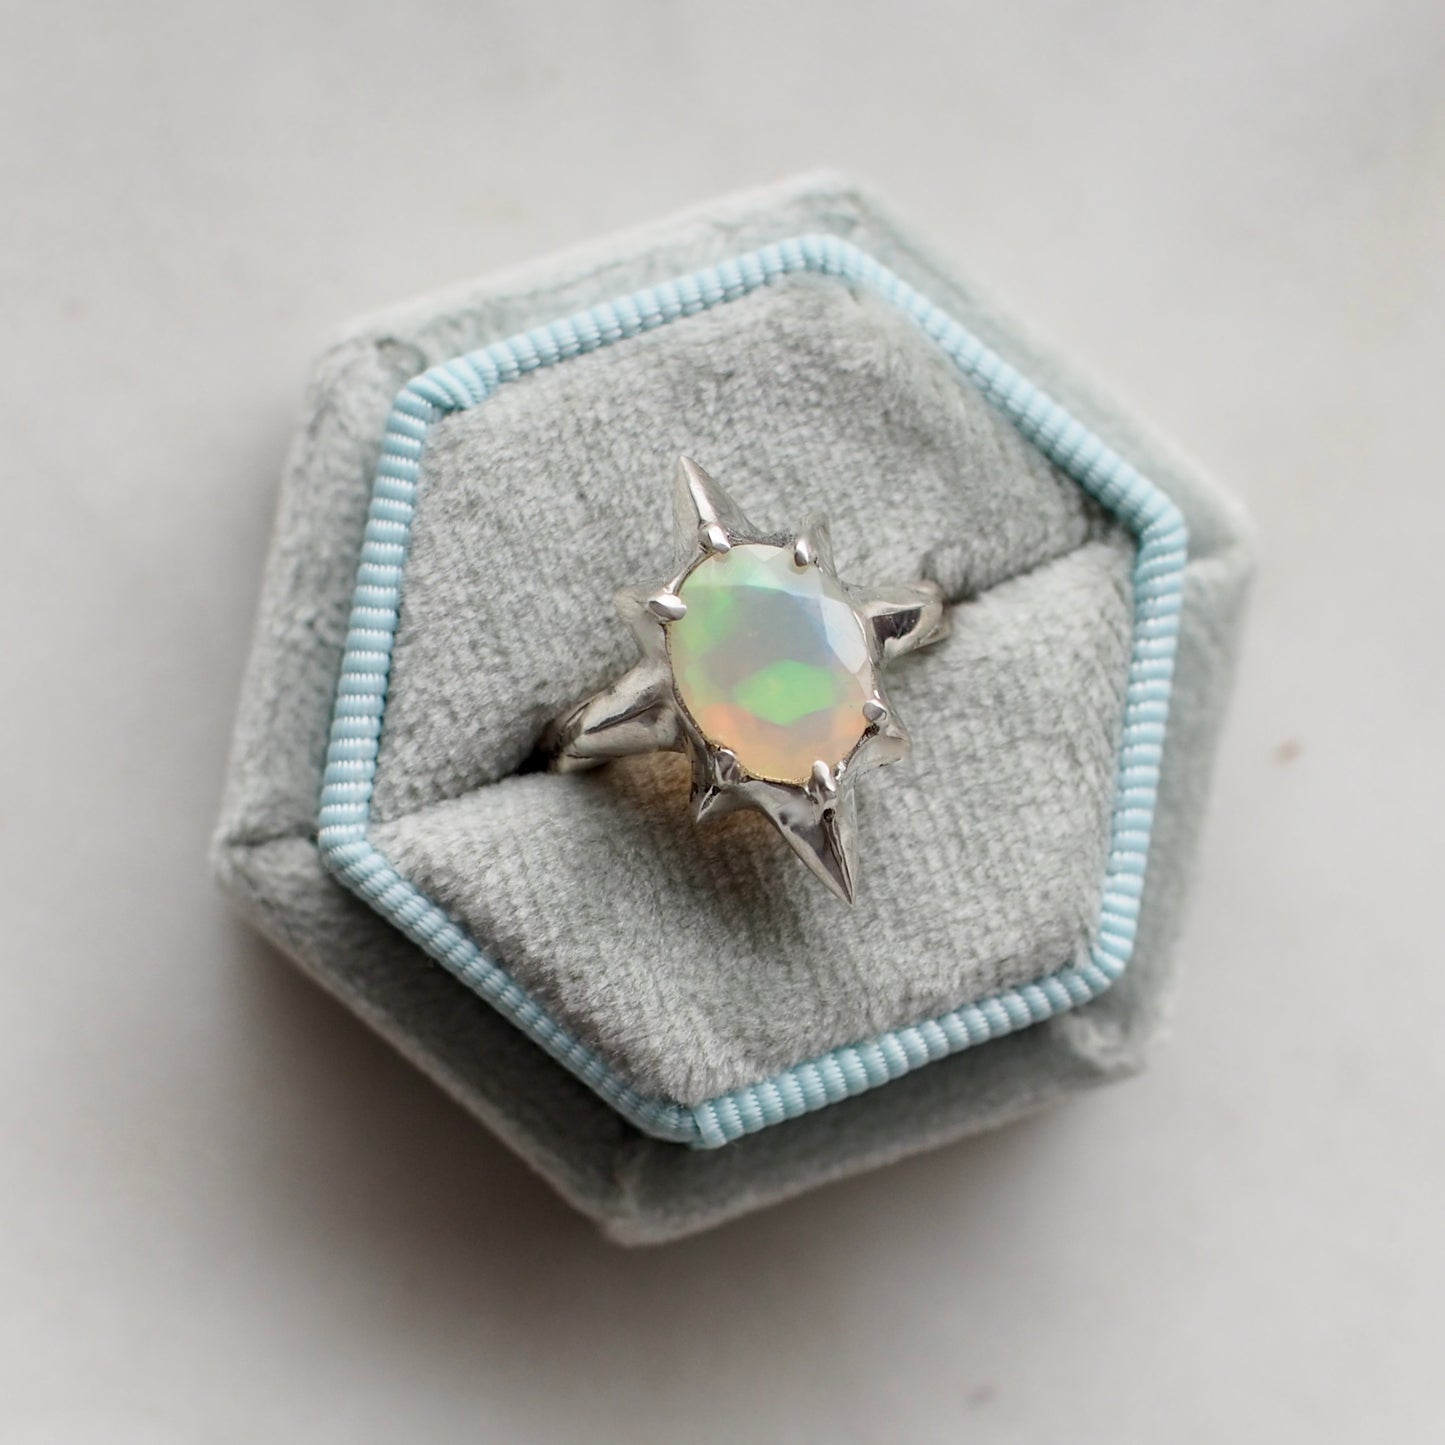 Opal Star Statement Ring - One of a Kind